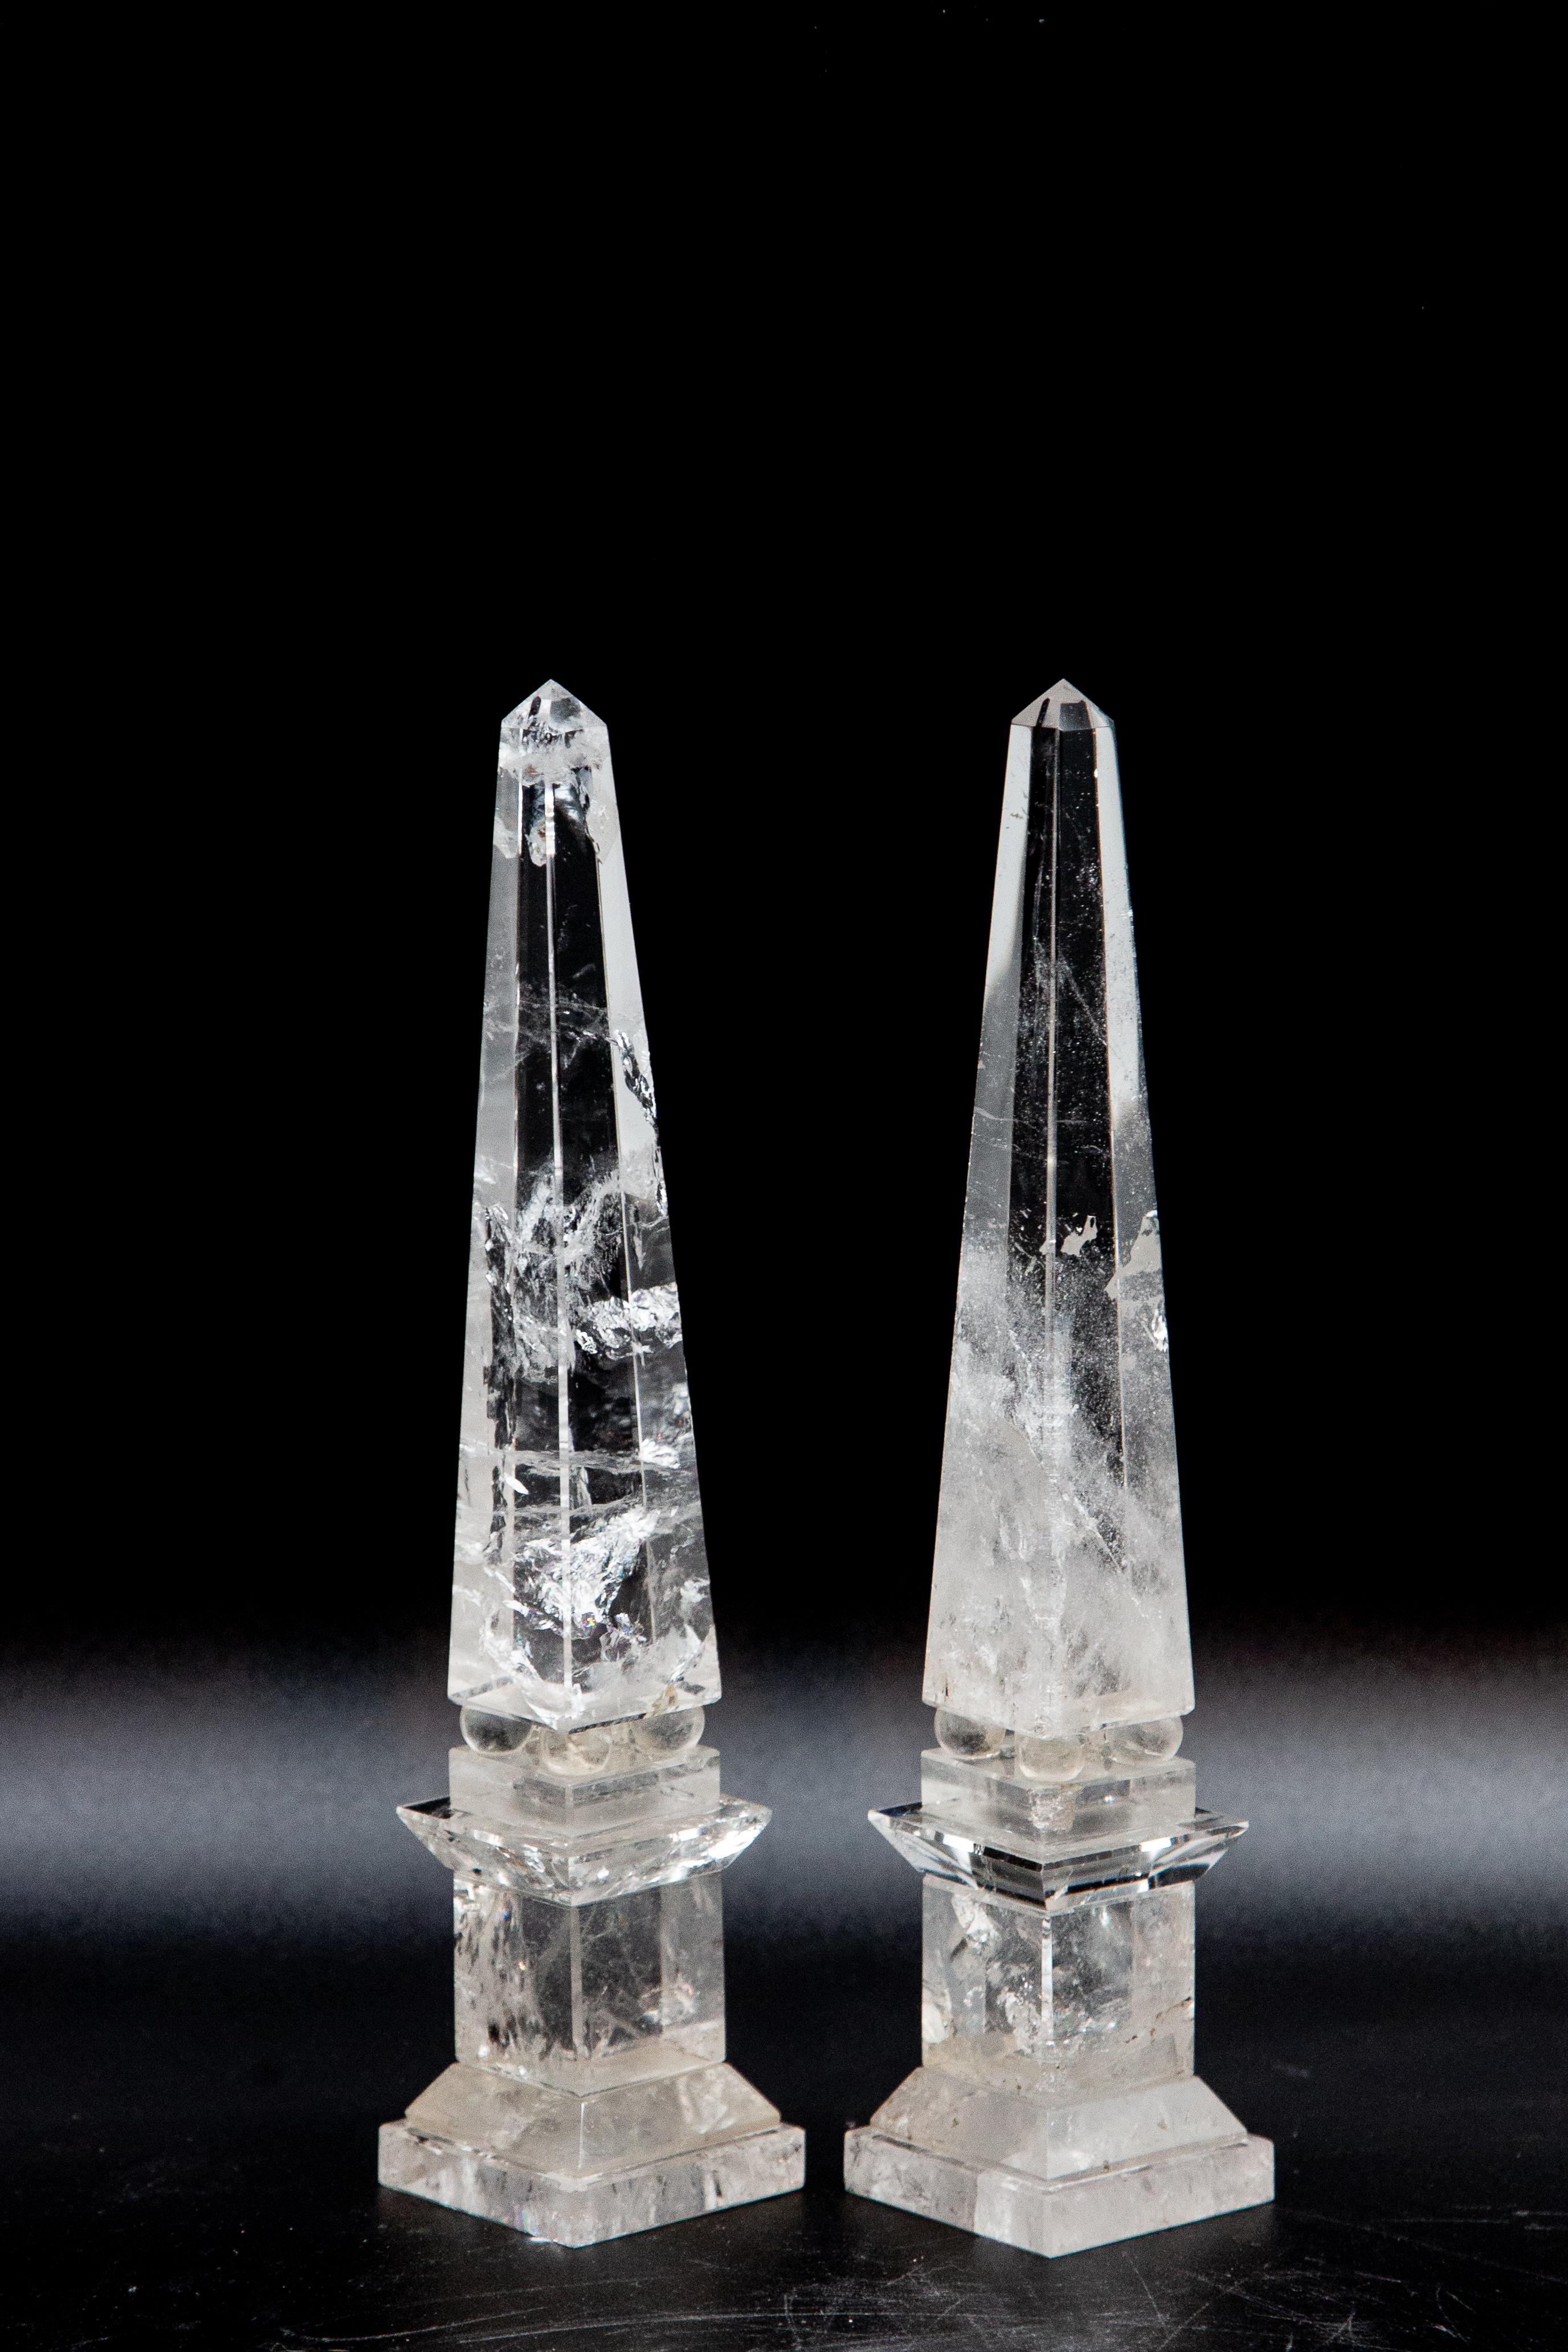 Pair of neoclassical rock crystal obelisks. Pair of hand-cut rock crystal obelisks on square plinth bases. Handmade in Madagascar.

Since antiquity, varieties of quartz have been historically used in the making of jewelry and hardstone carvings,